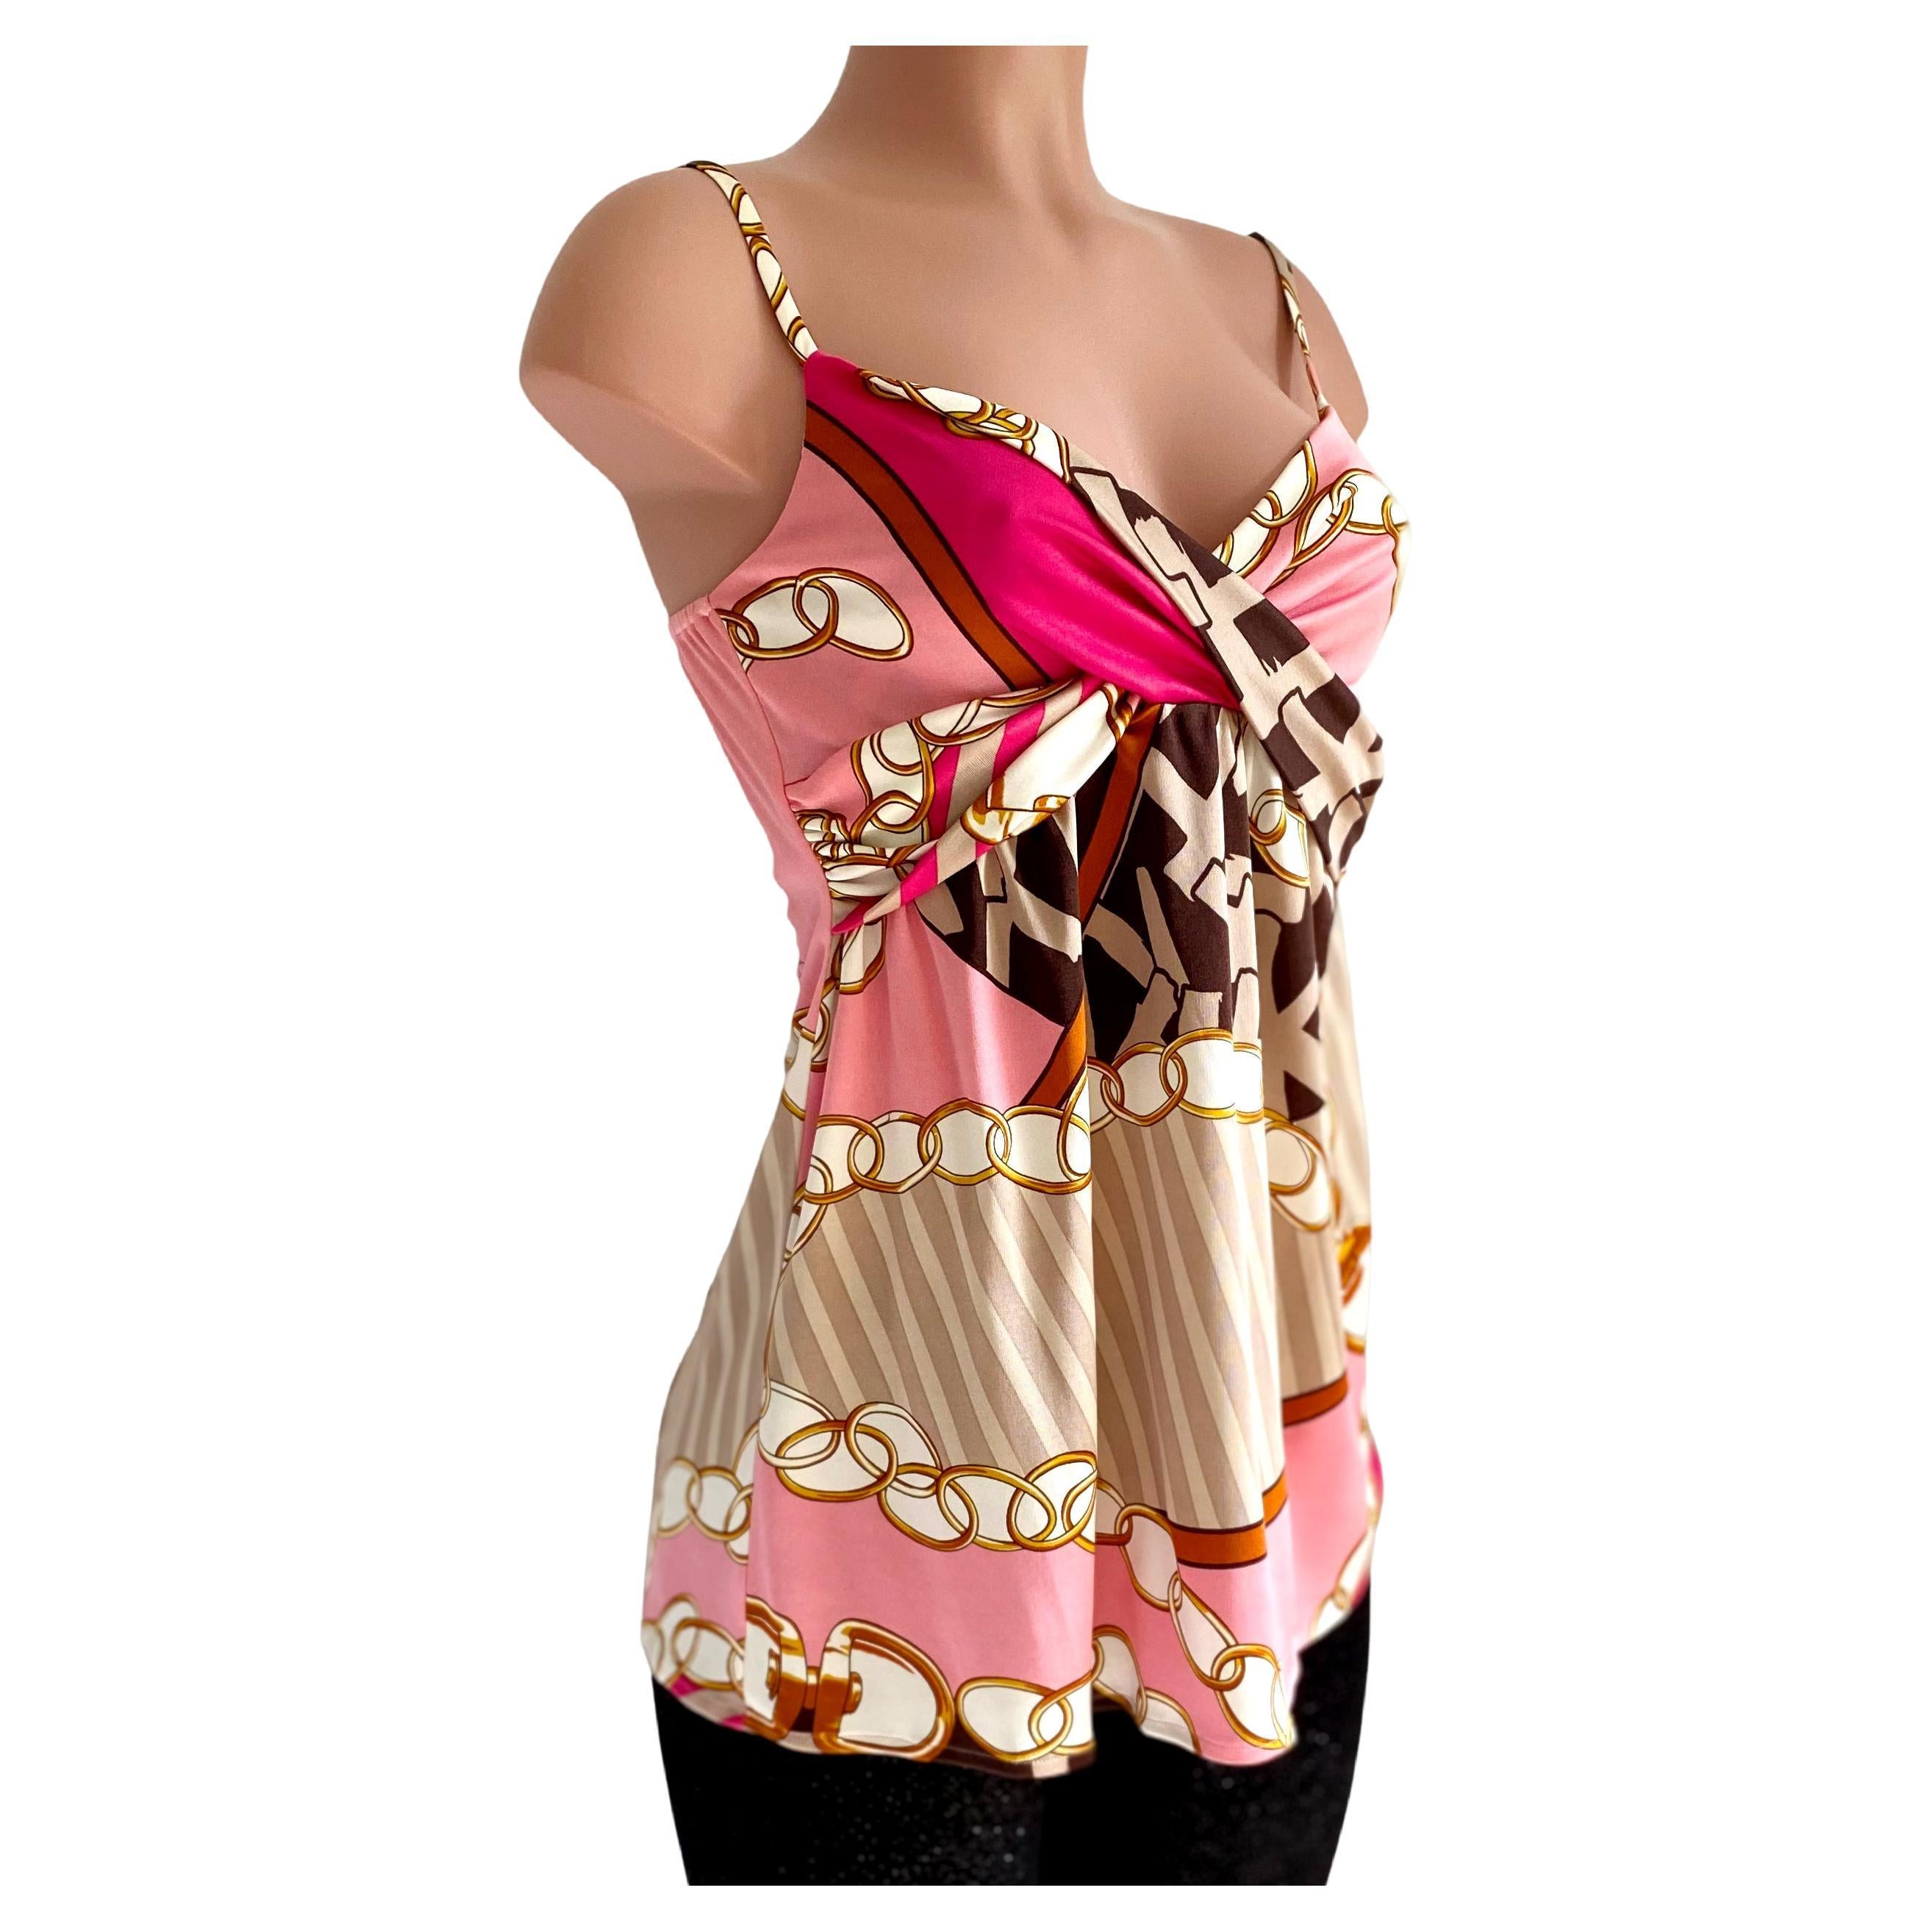 Pink printed silk jersey Cami Slip top - NWT Flora Kung For Sale